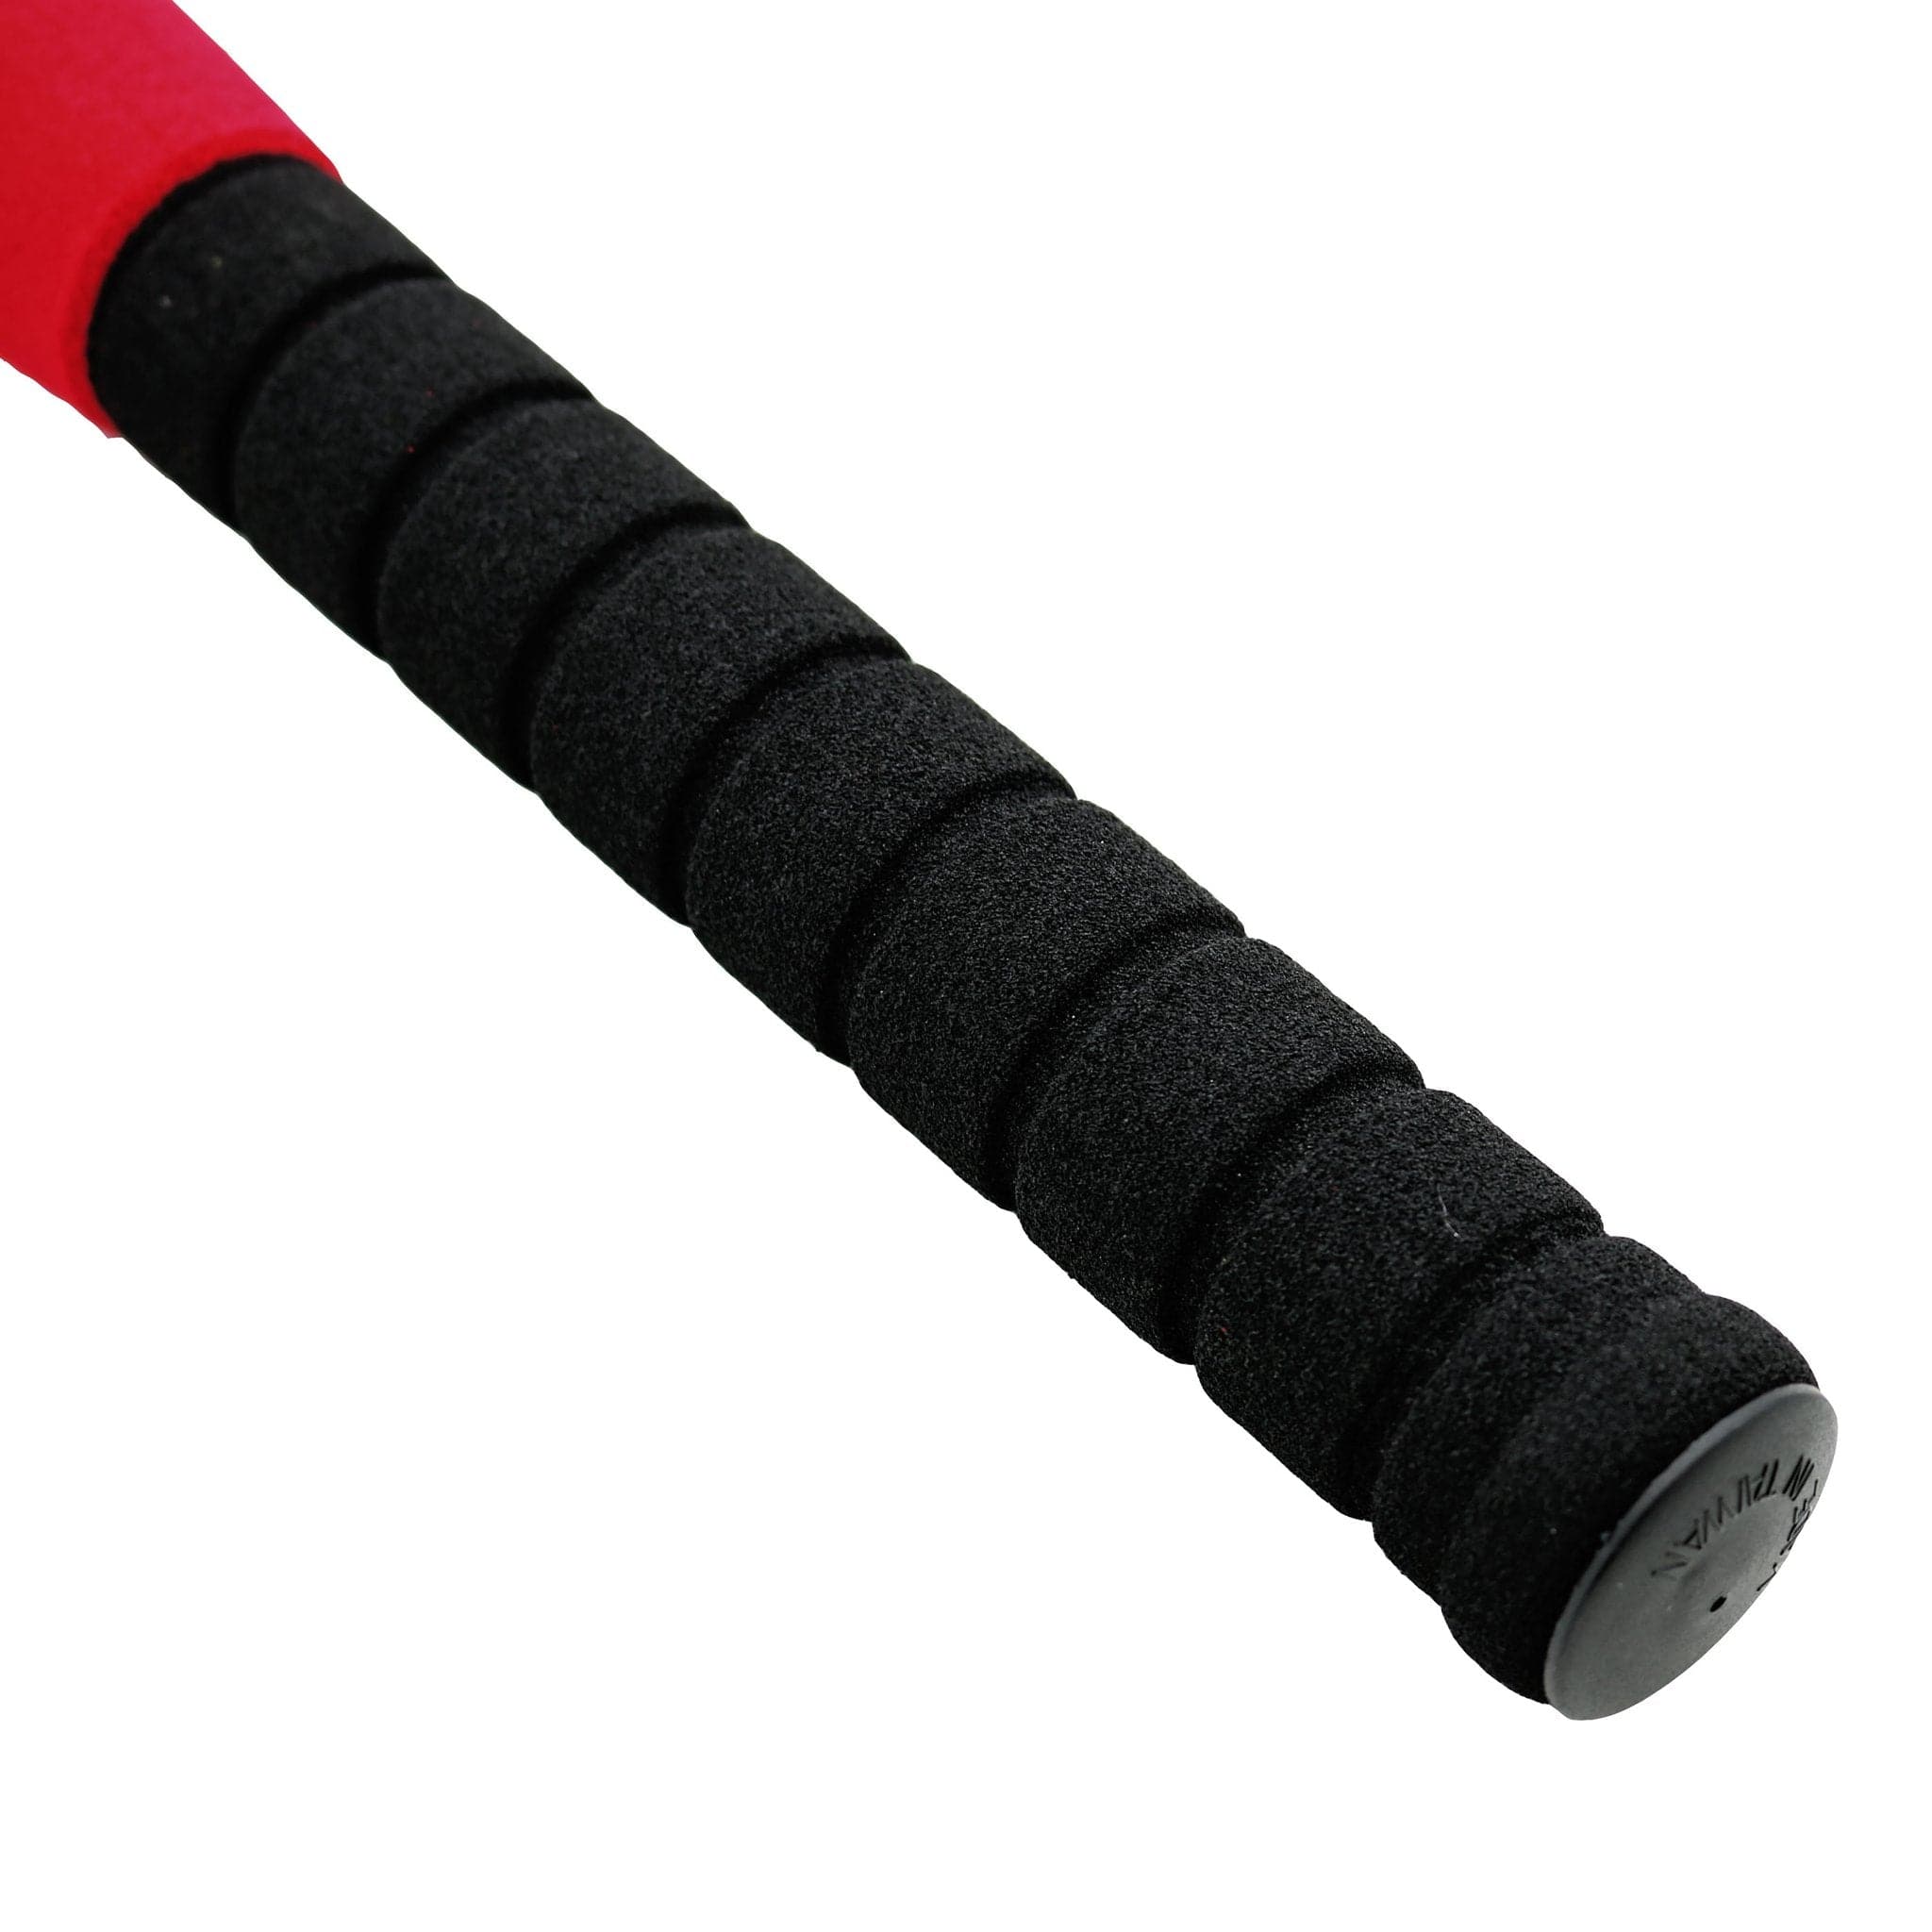 First-play Mini Rounders Bat, The First-play Mini Rounders Bat is the perfect introduction to the game of rounders for beginners. Designed with safety in mind, it is foam covered to provide an extra layer of protection. This bat is suitable for use with foam and tennis balls, making it versatile for different types of play. The foam covering ensures that young players have a soft impact when hitting or catching the ball.The Mini Rounders Bat features a soft and easy grip handle, allowing kids to have a comf